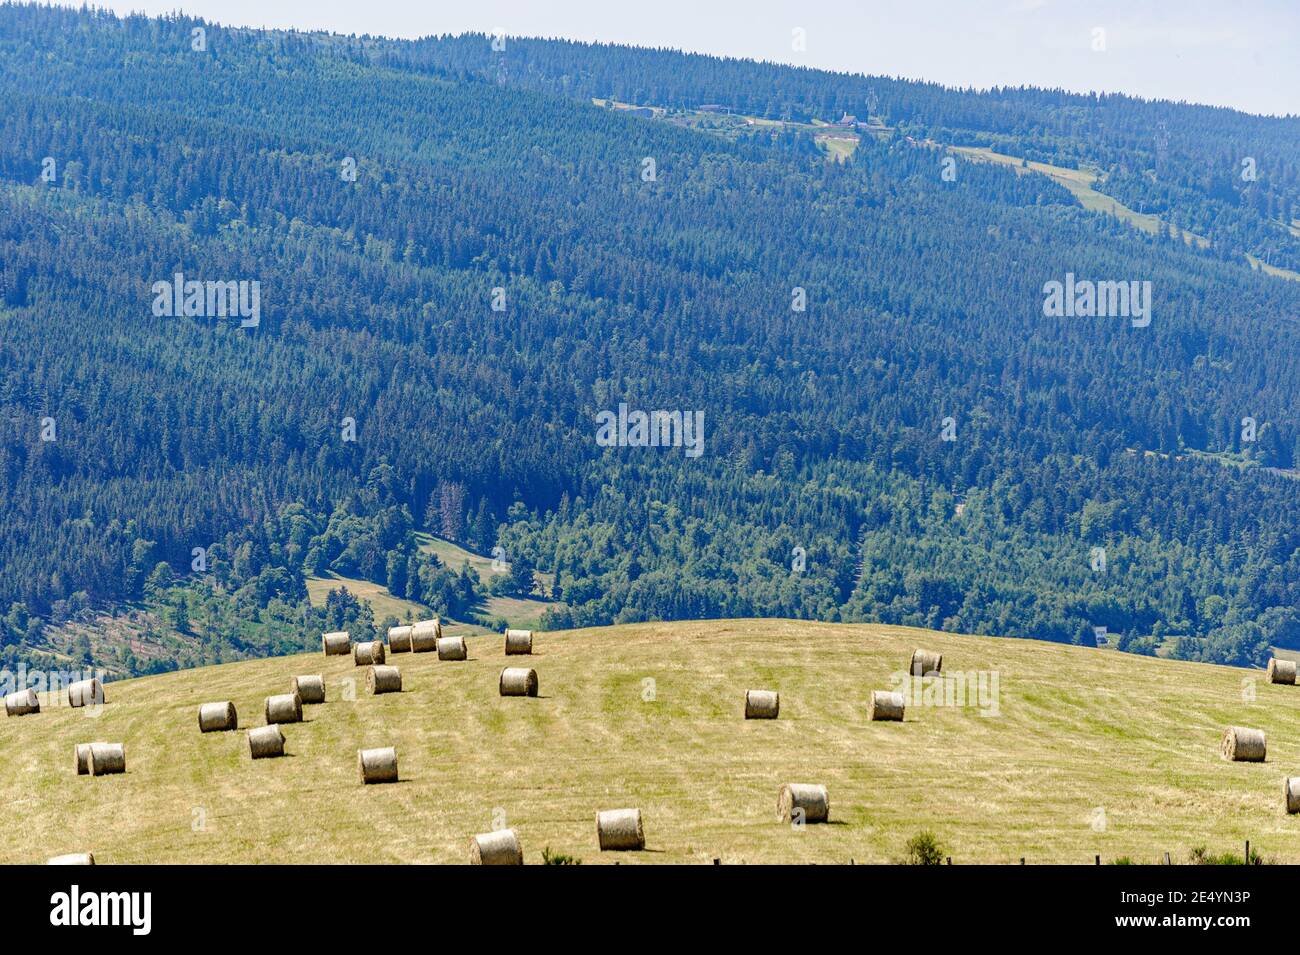 Vosges Mountains, France. Hay farming in the Vosges mountains. The bales of hay are waiting in the sun for the farmer to come and get them. Stock Photo